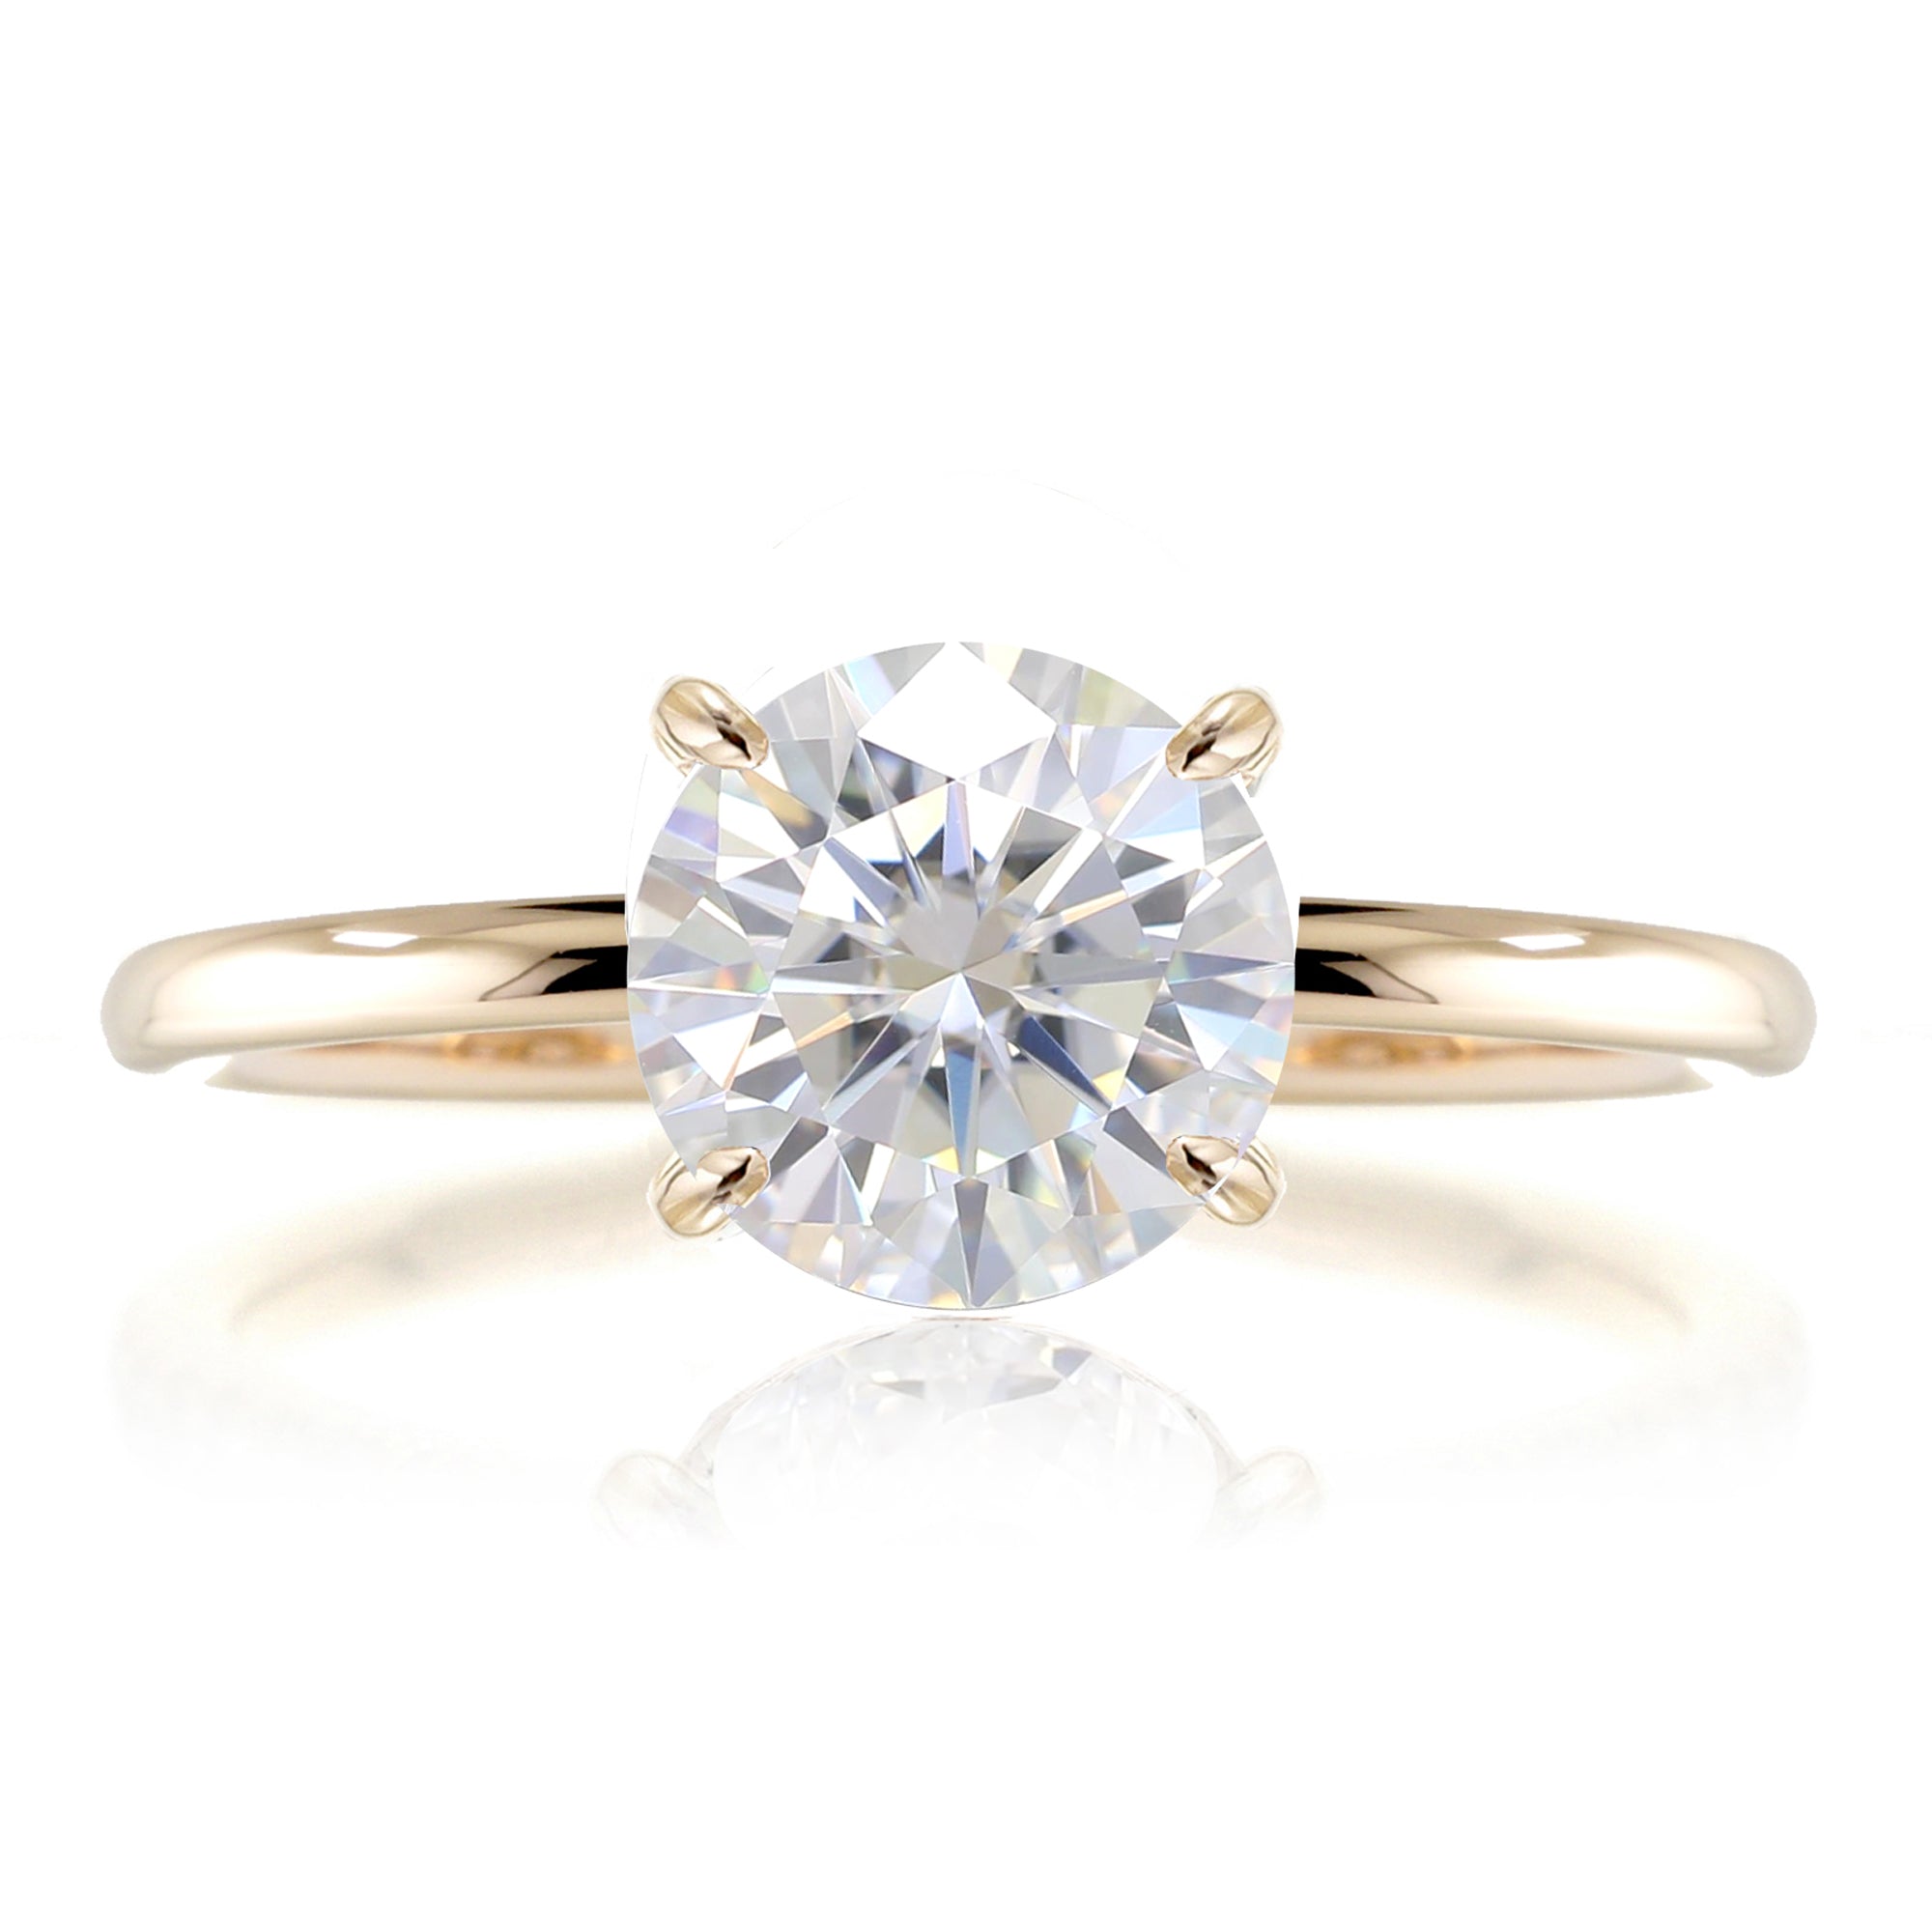 Round brilliant cut moissanite solid band engagement ring yellow gold - The Ava